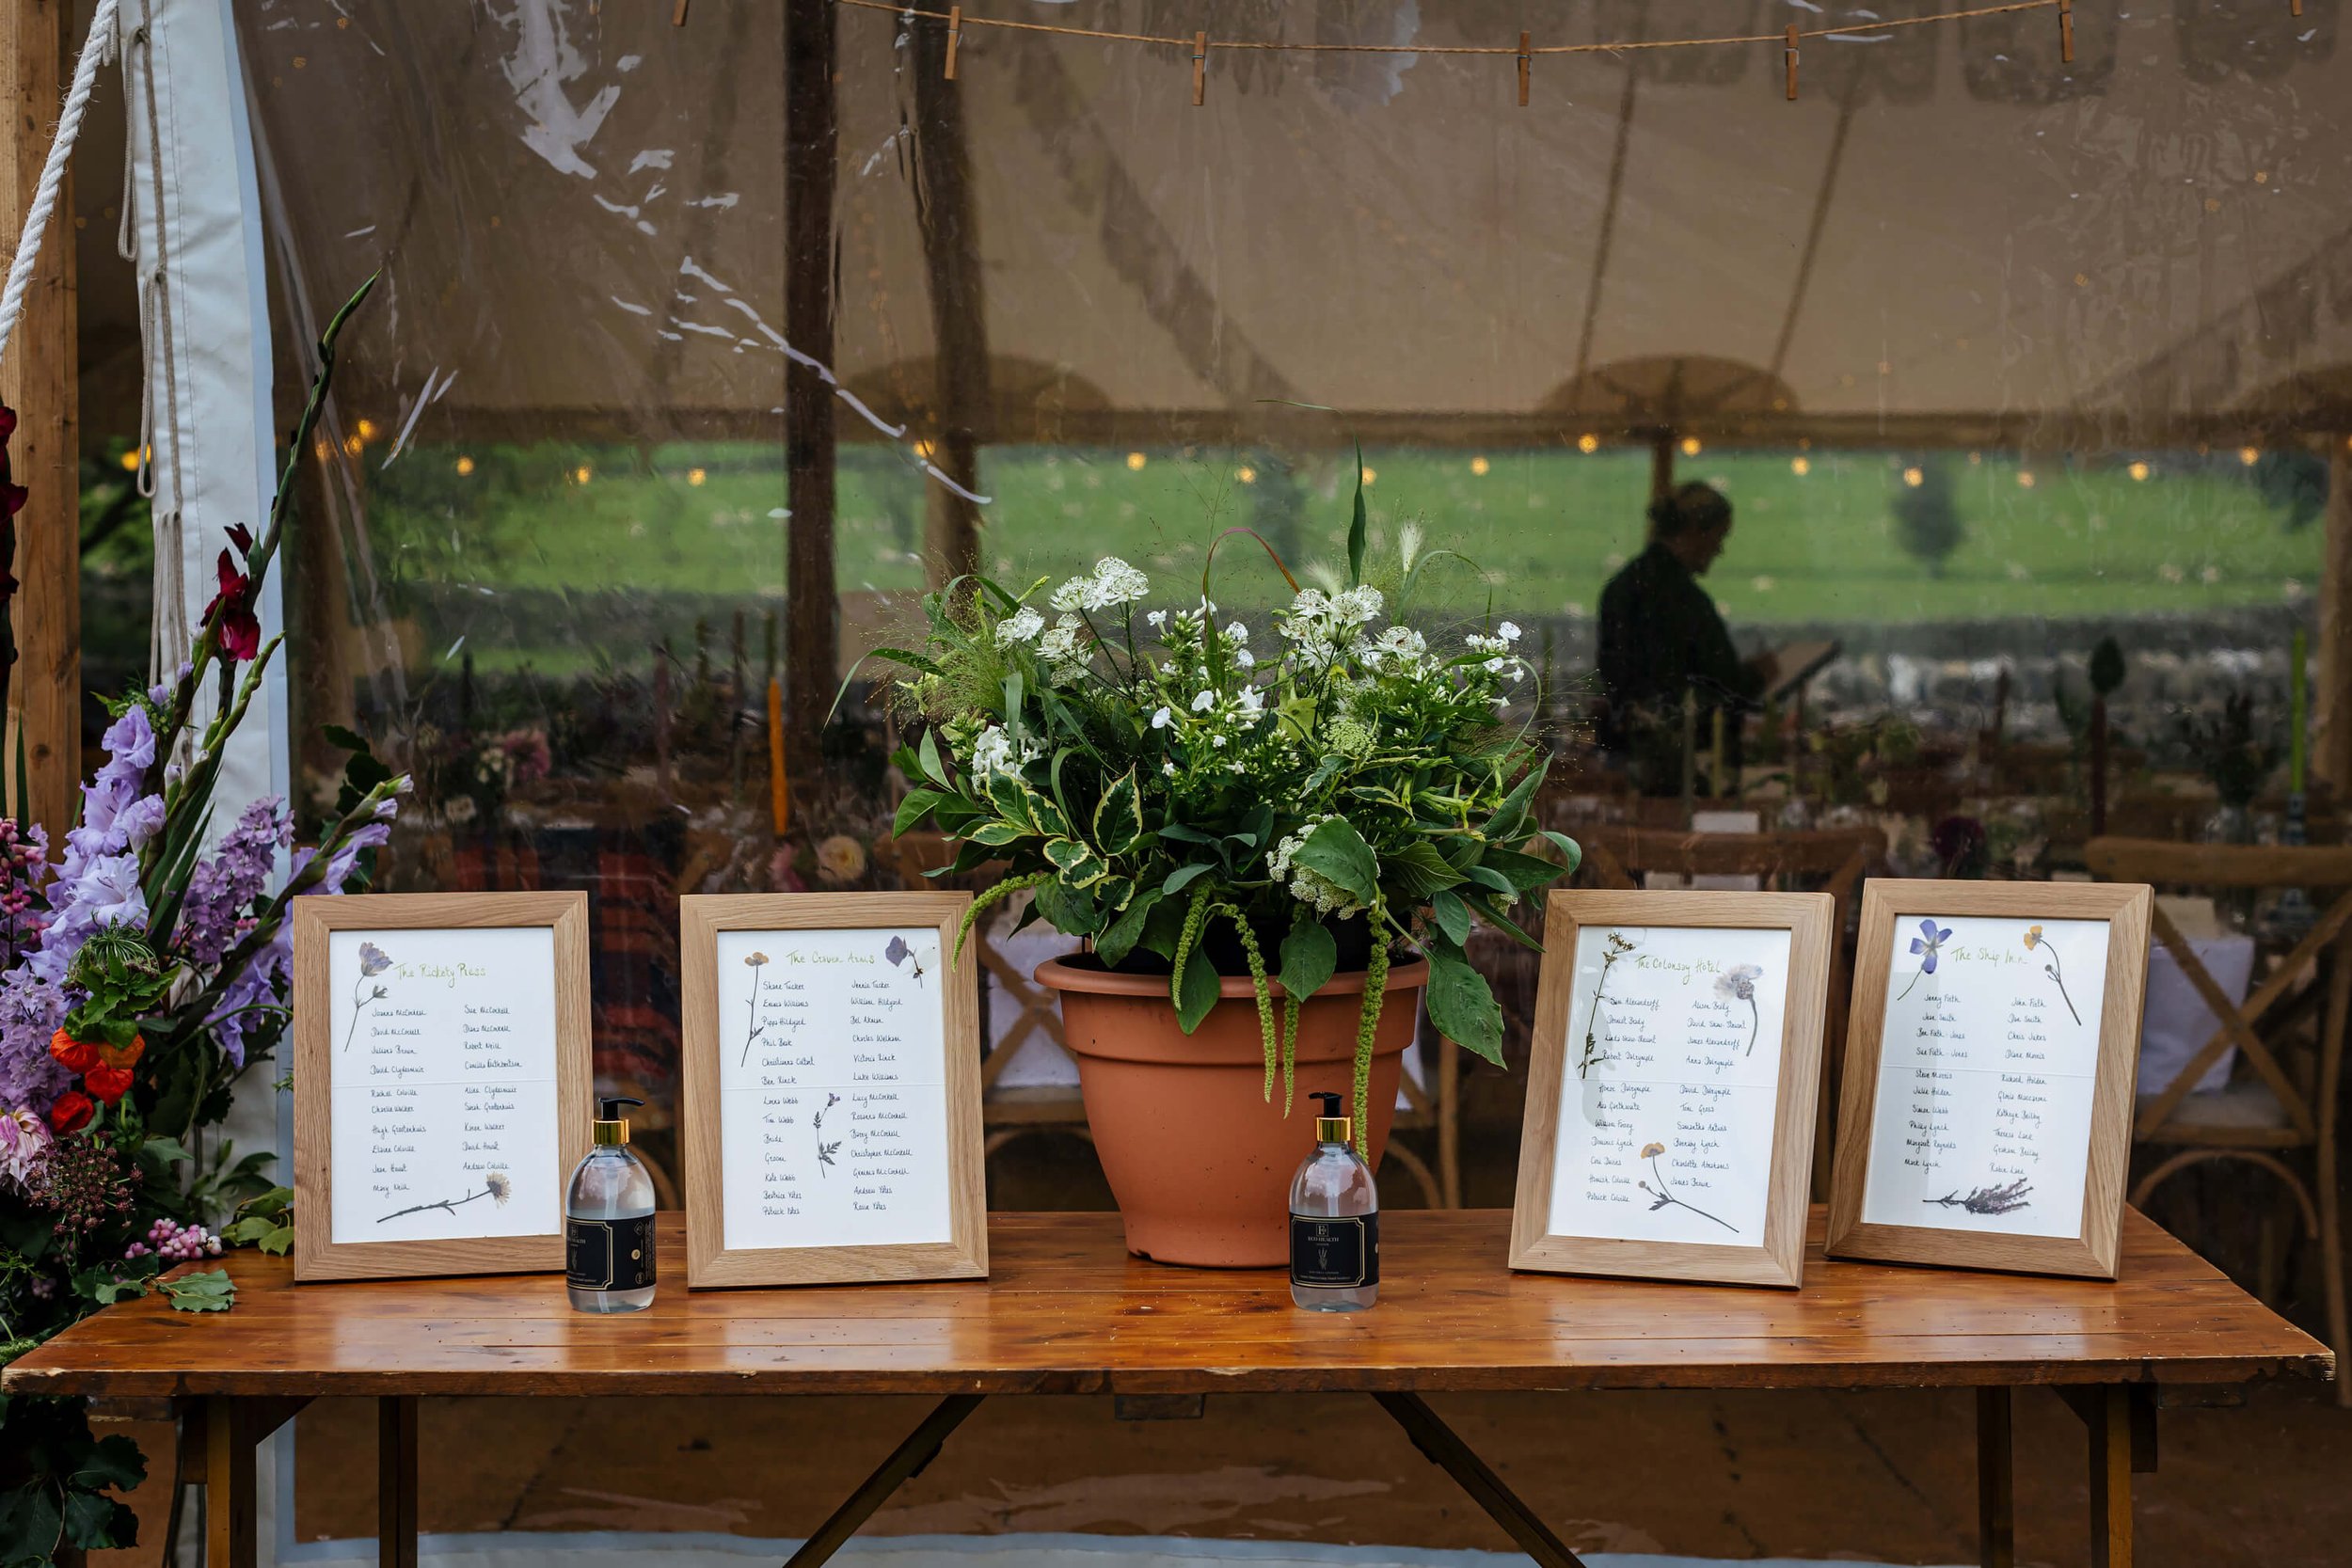 Seating plan for a Yorkshire wedding